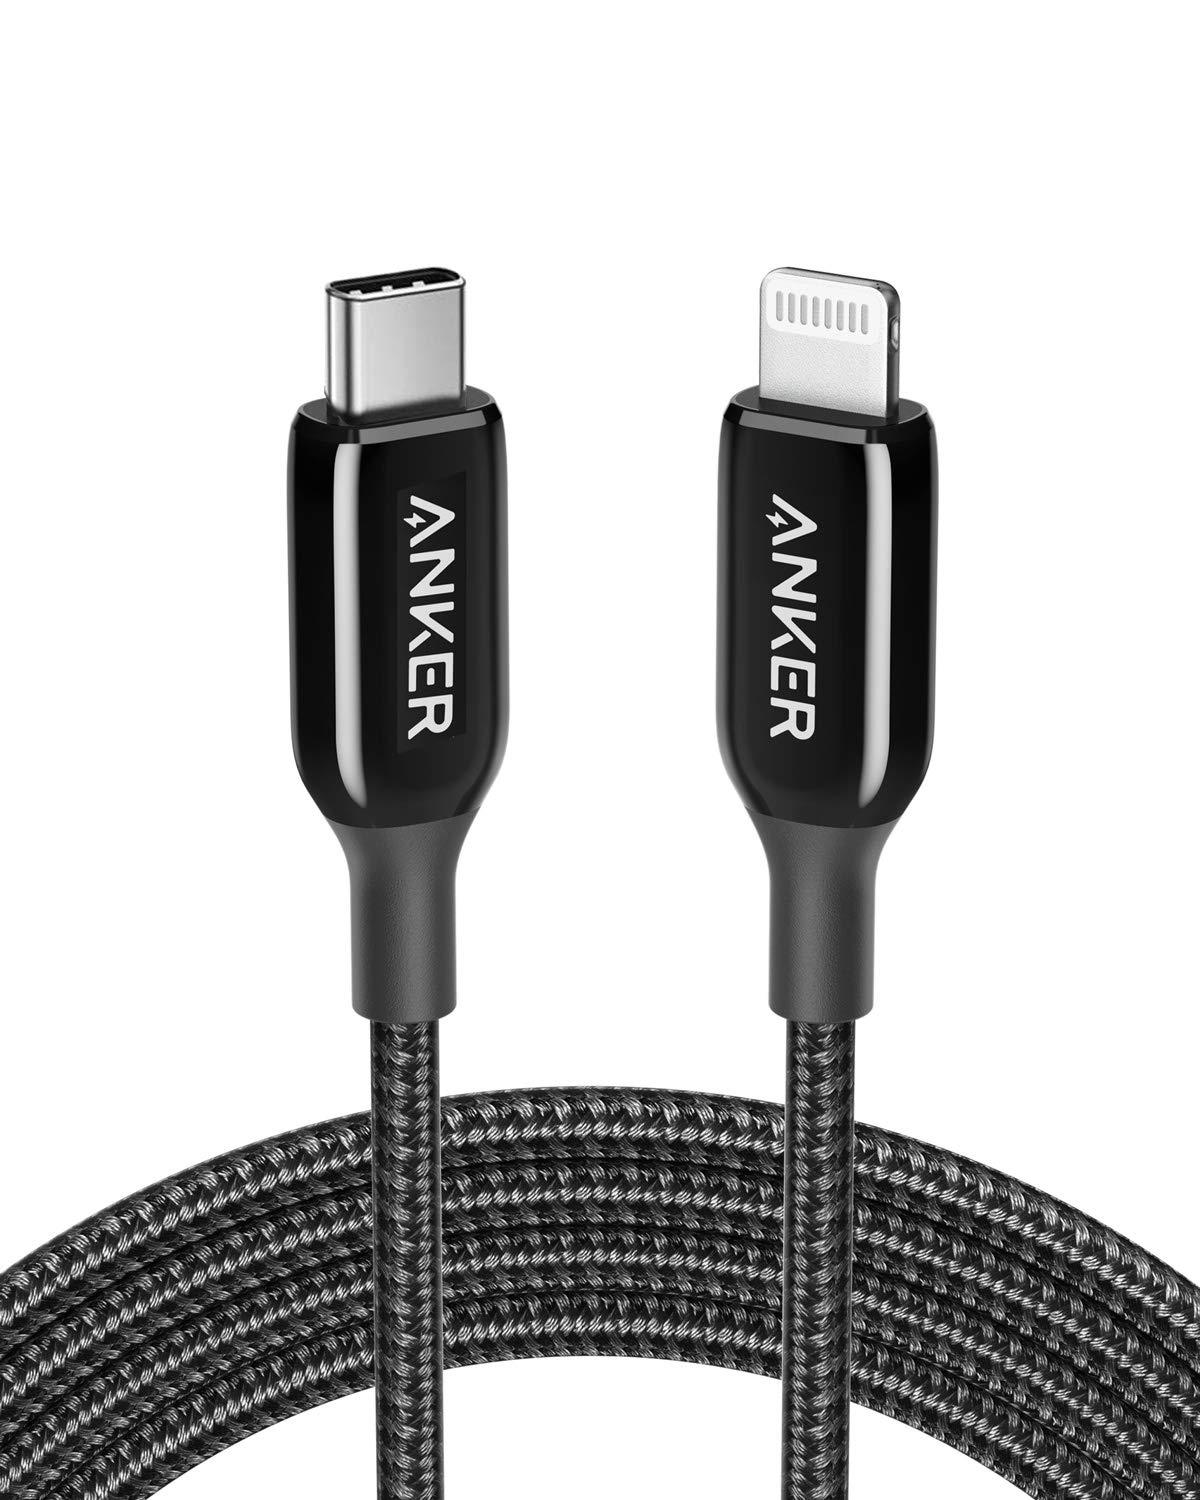 ANKER PowerLine+ III USB-C to Lightning Cable 6ft / 1.8M